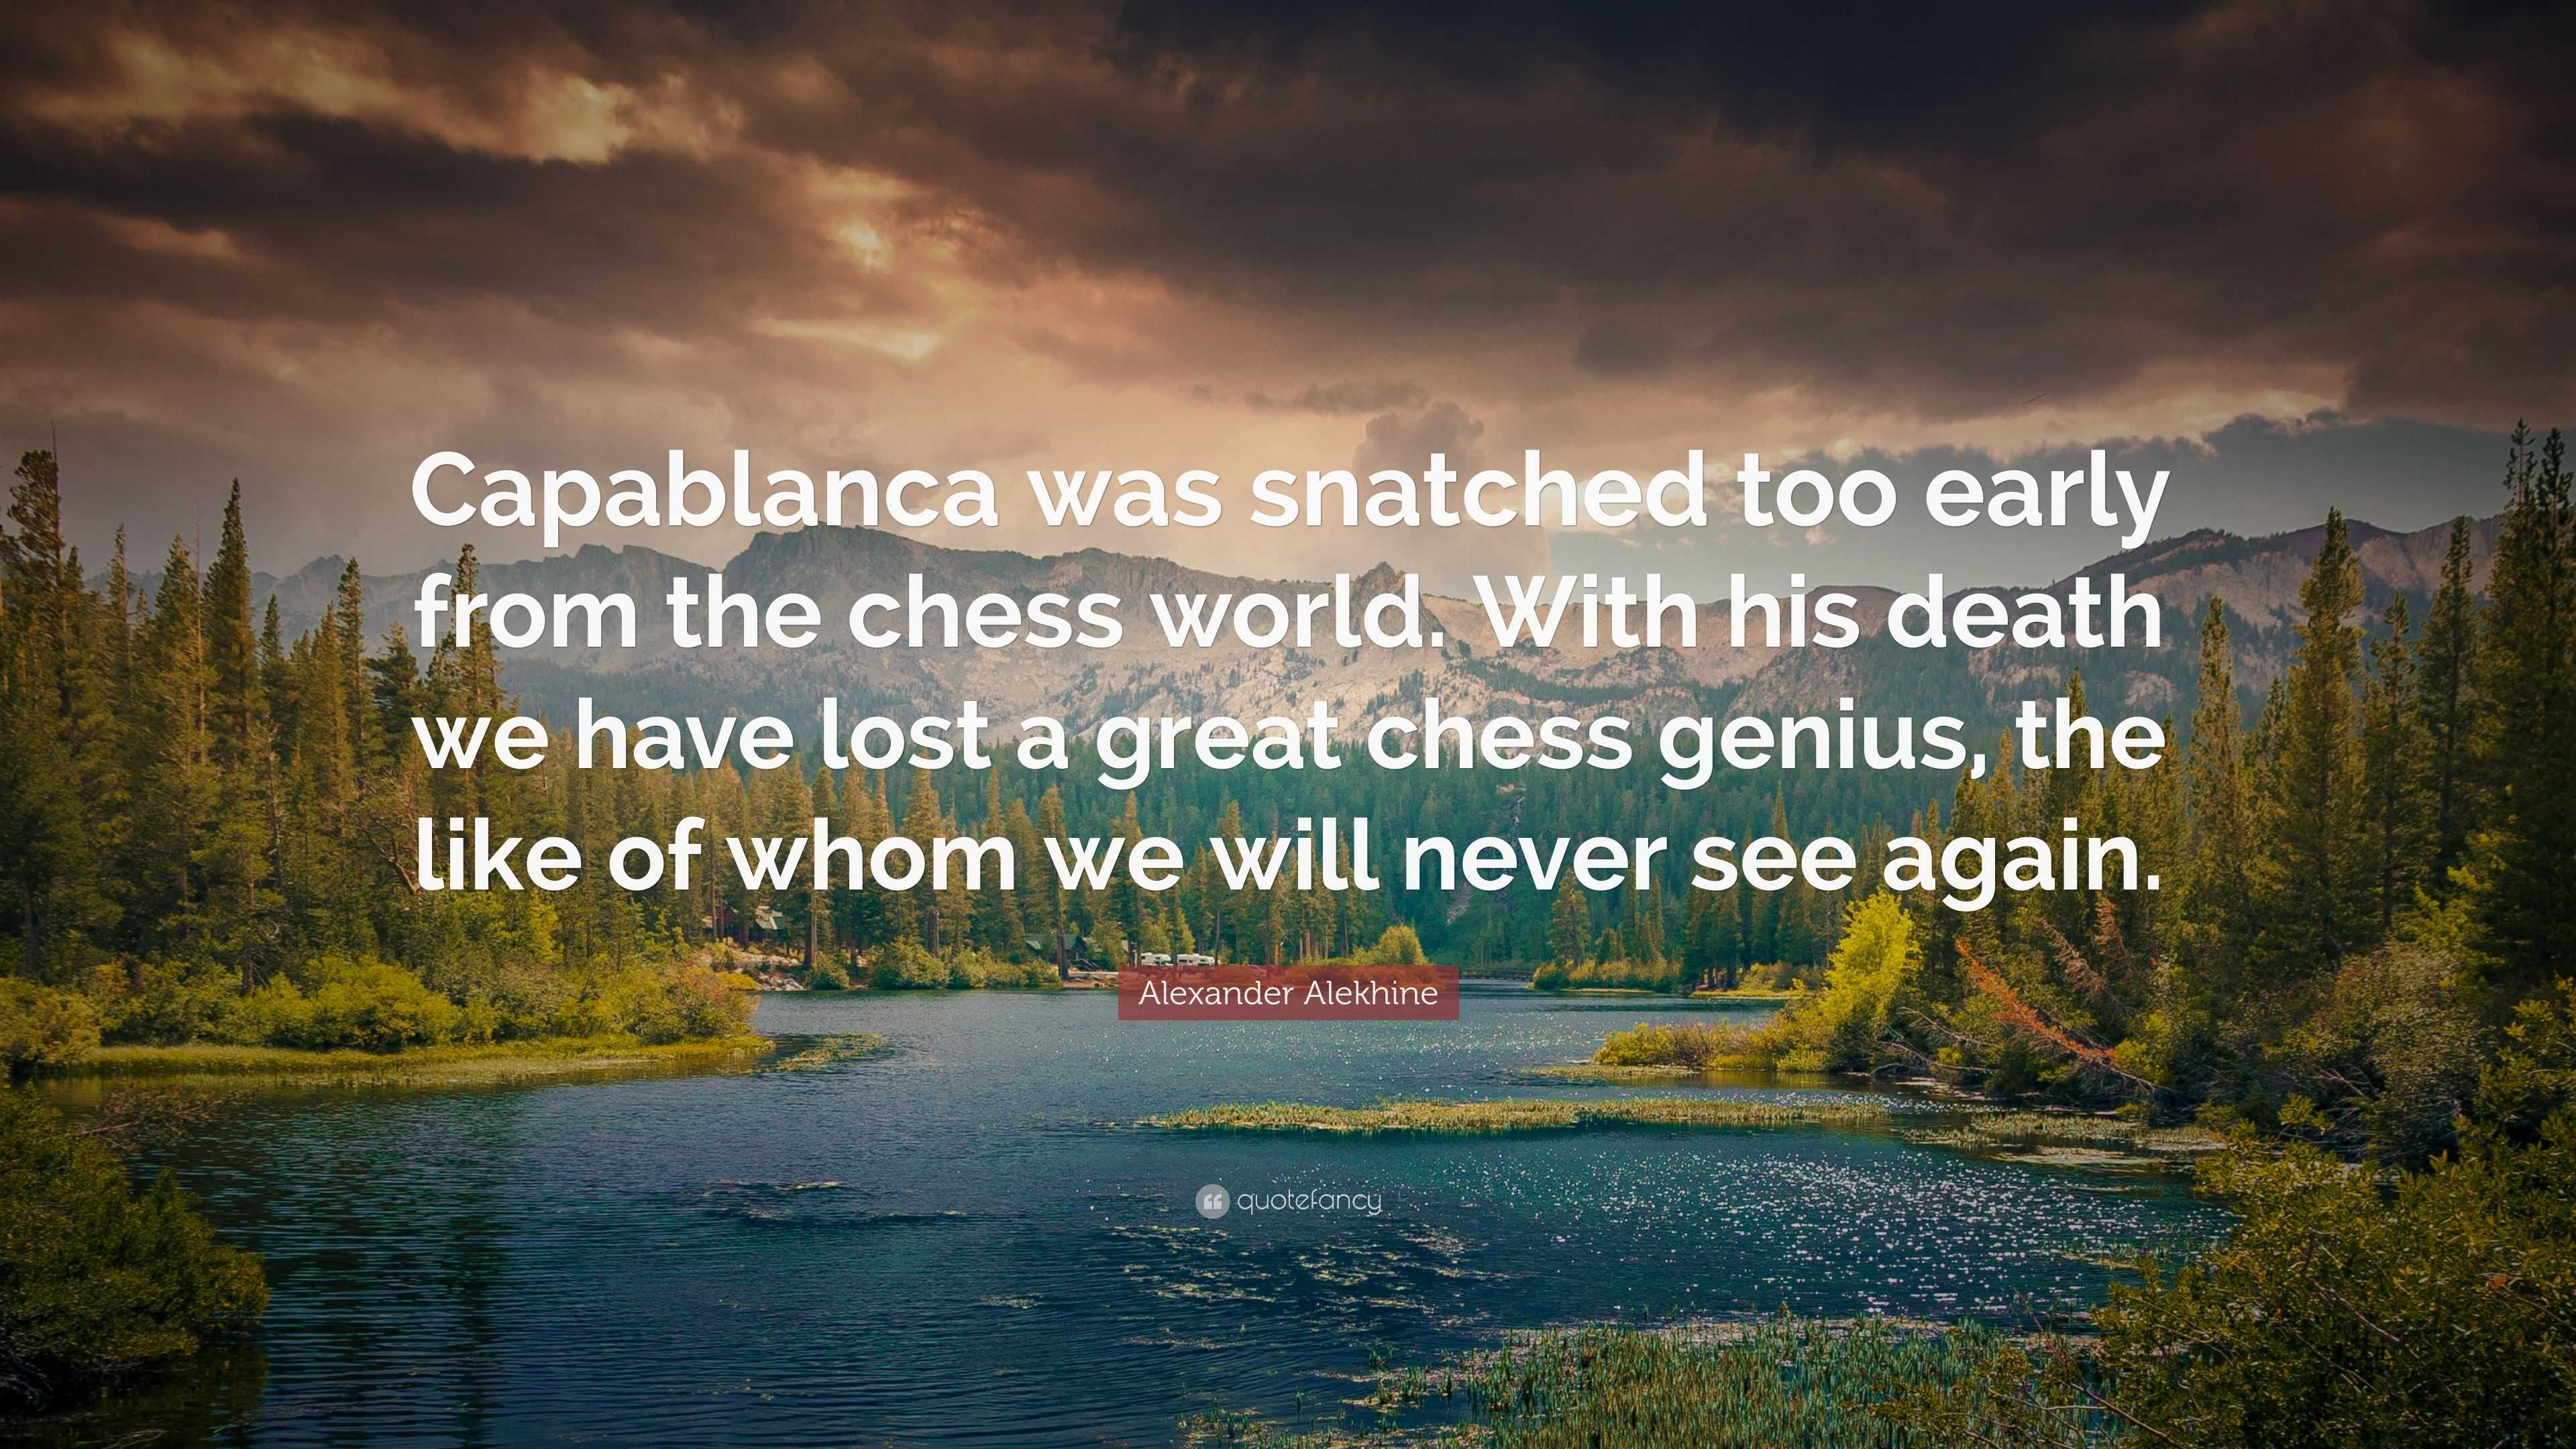 Alexander Alekhine Quote: “Capablanca was snatched too early from the chess  world. With his death we have lost a great chess genius, the like of wh”